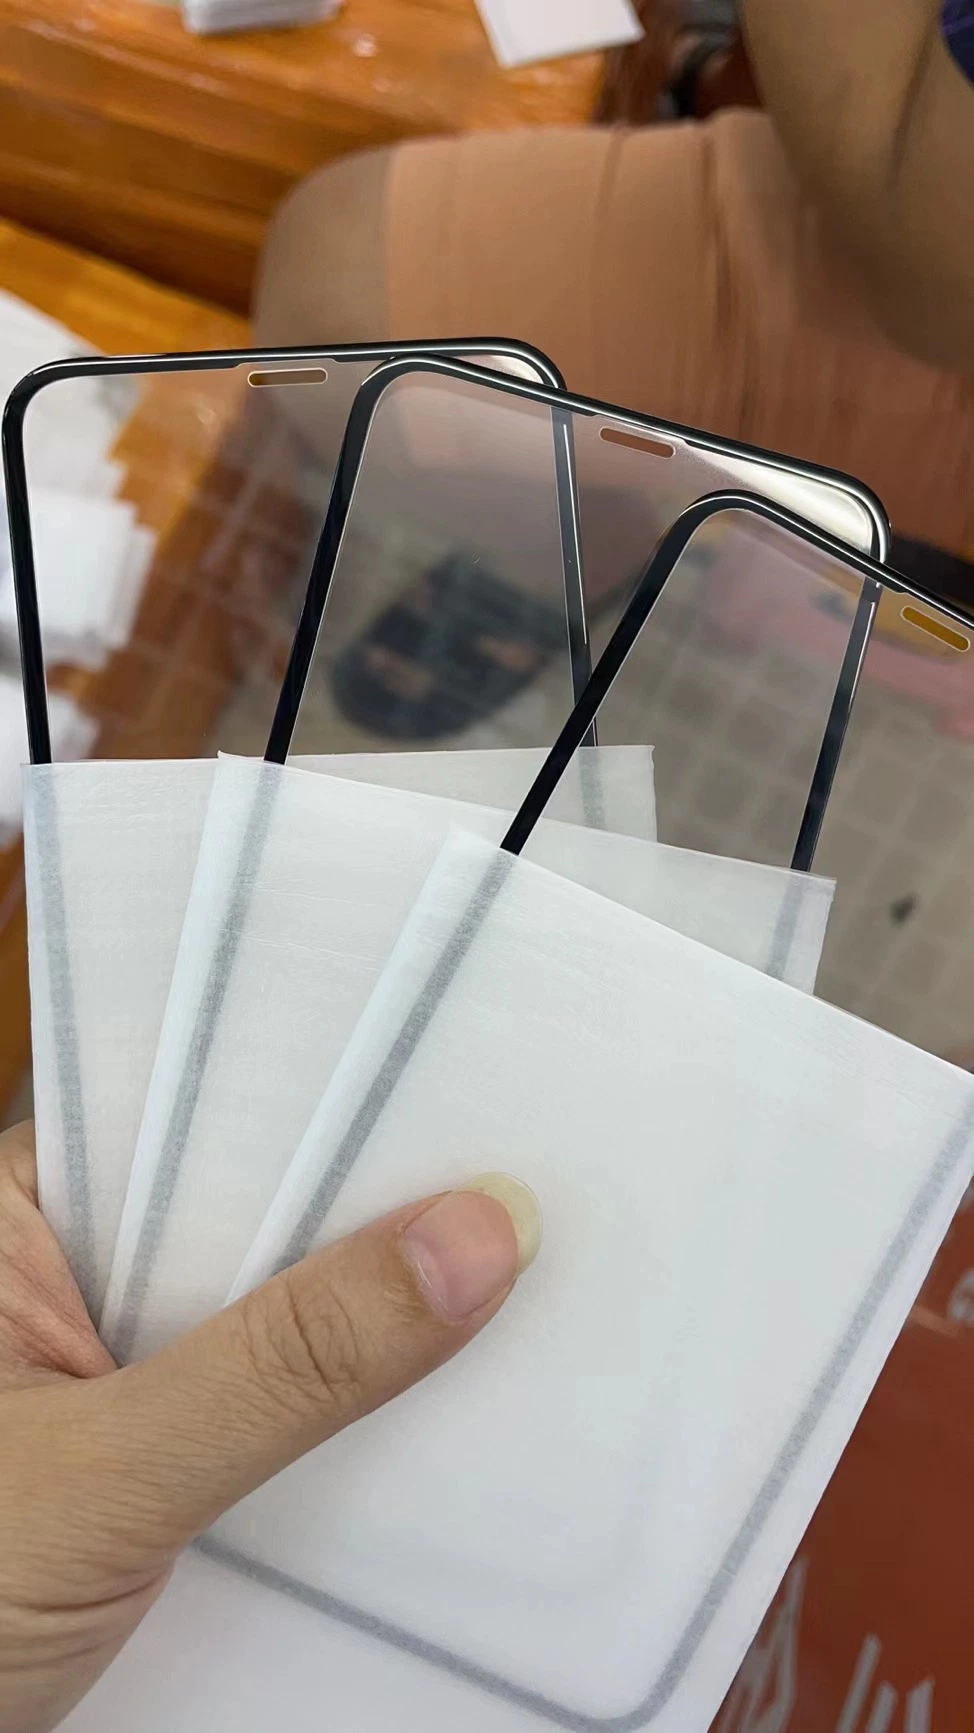 Wholesale Factory Price High Quality Anti Shock Screen Protector 20d Tempered Glass Film for iPhone 13 11 12 PRO Max 6 7 8 Plus X Mobile Phone Accessories